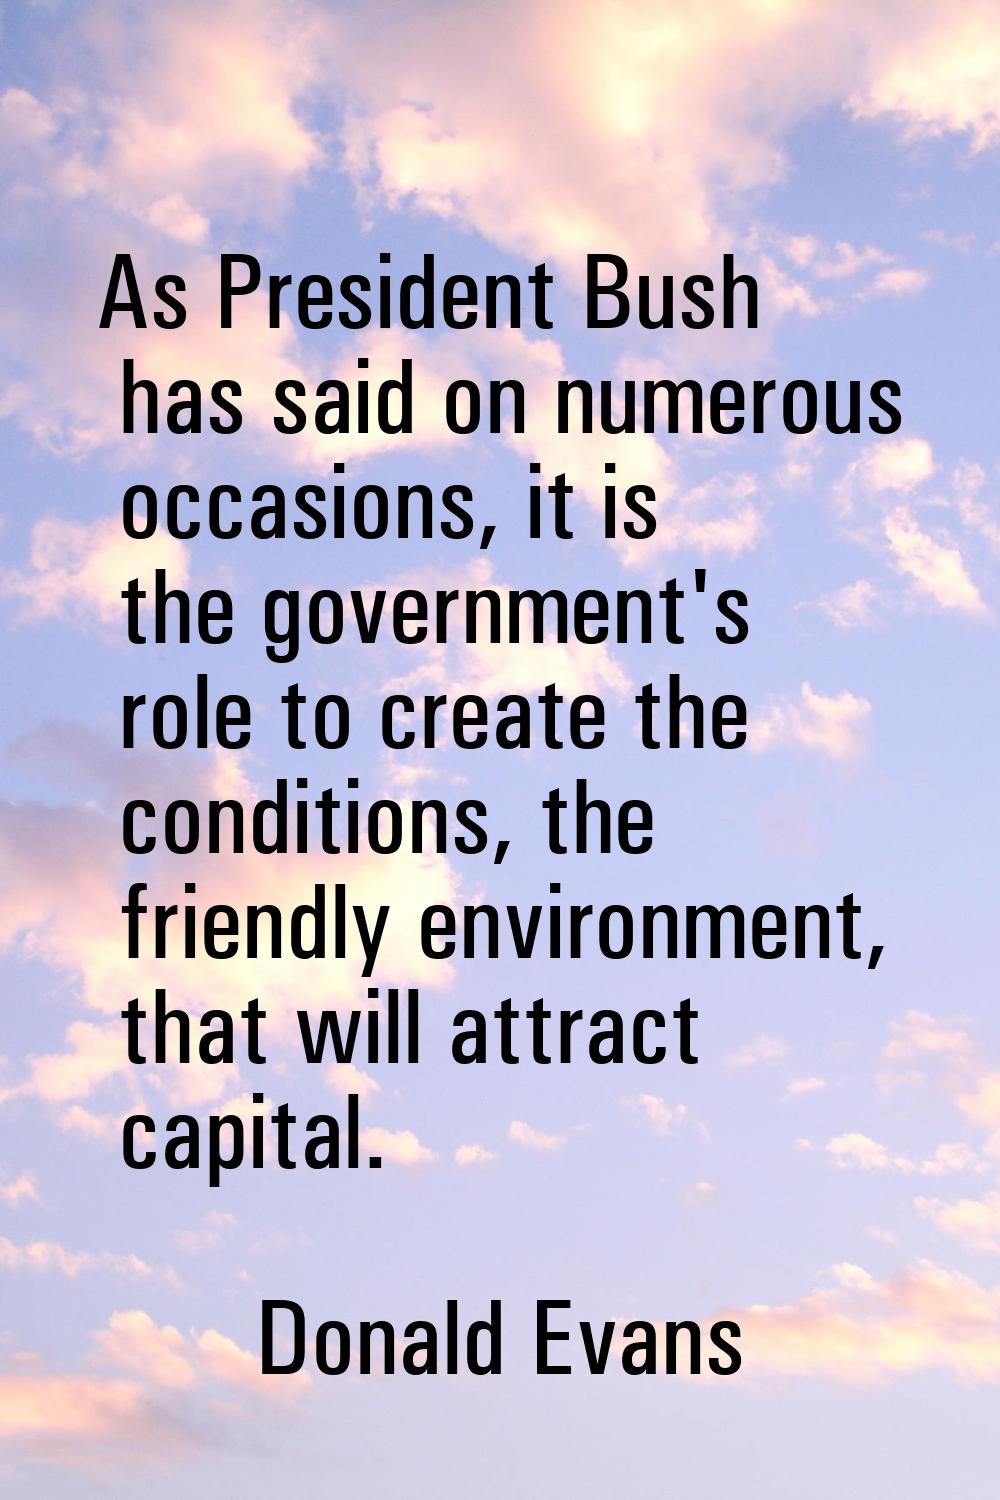 As President Bush has said on numerous occasions, it is the government's role to create the conditi